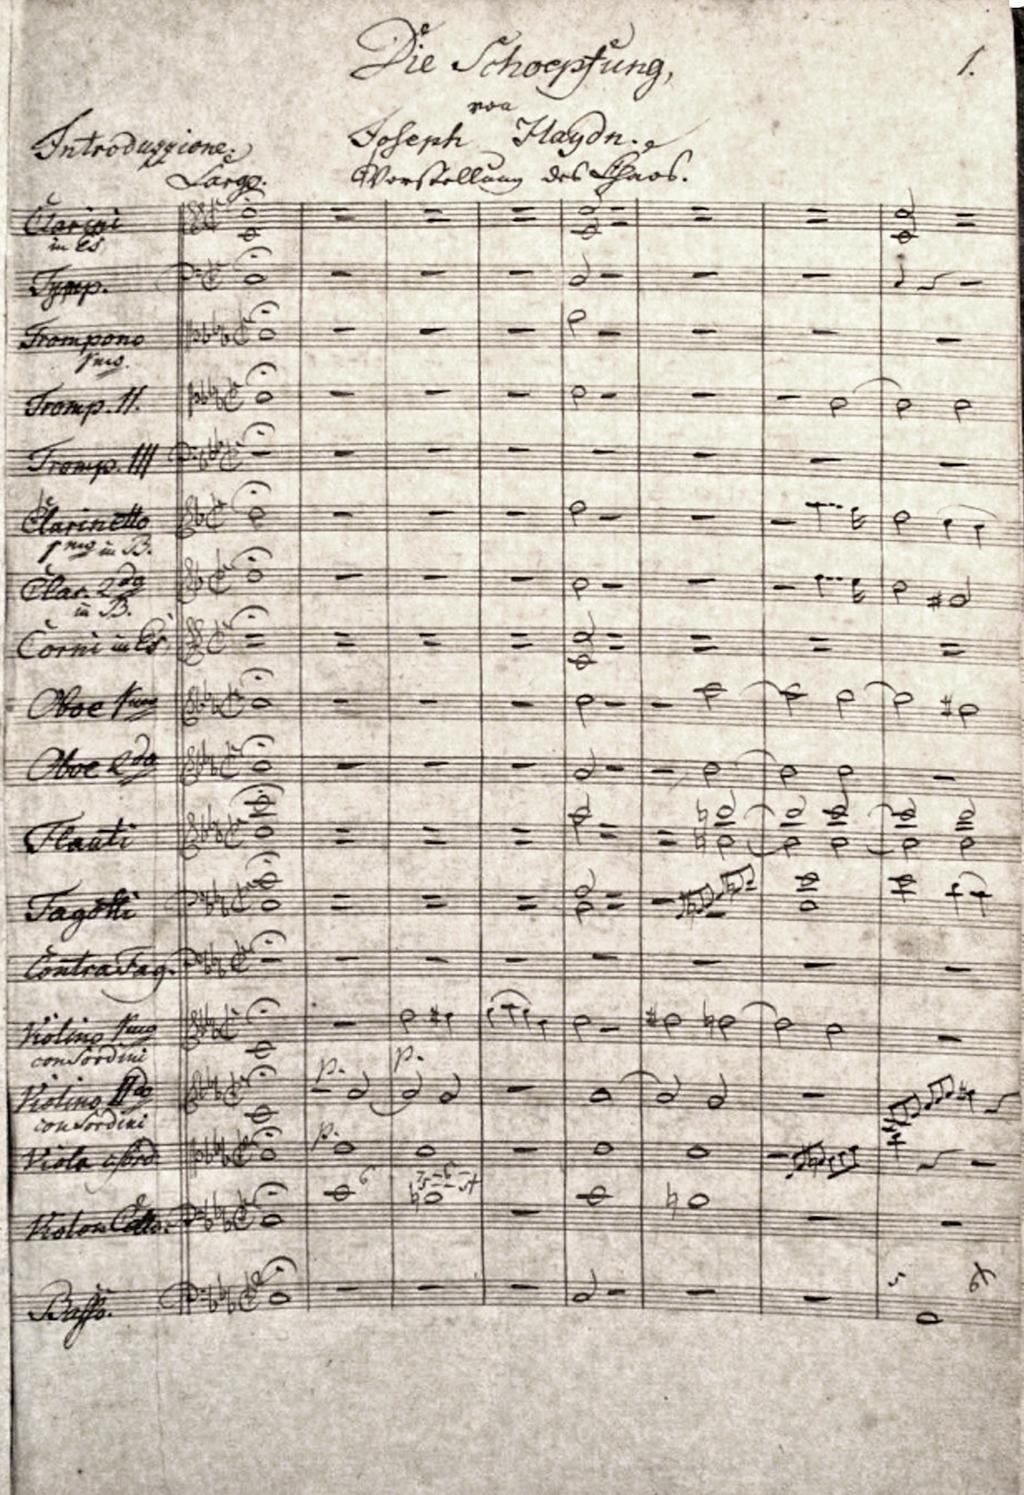 Illustration 2: Manuscript of "The Creation", an oratorio by Franz Joseph Haydn (courtesy of Petrucci Music Library) Material copyright 2016 by Gary Daum,